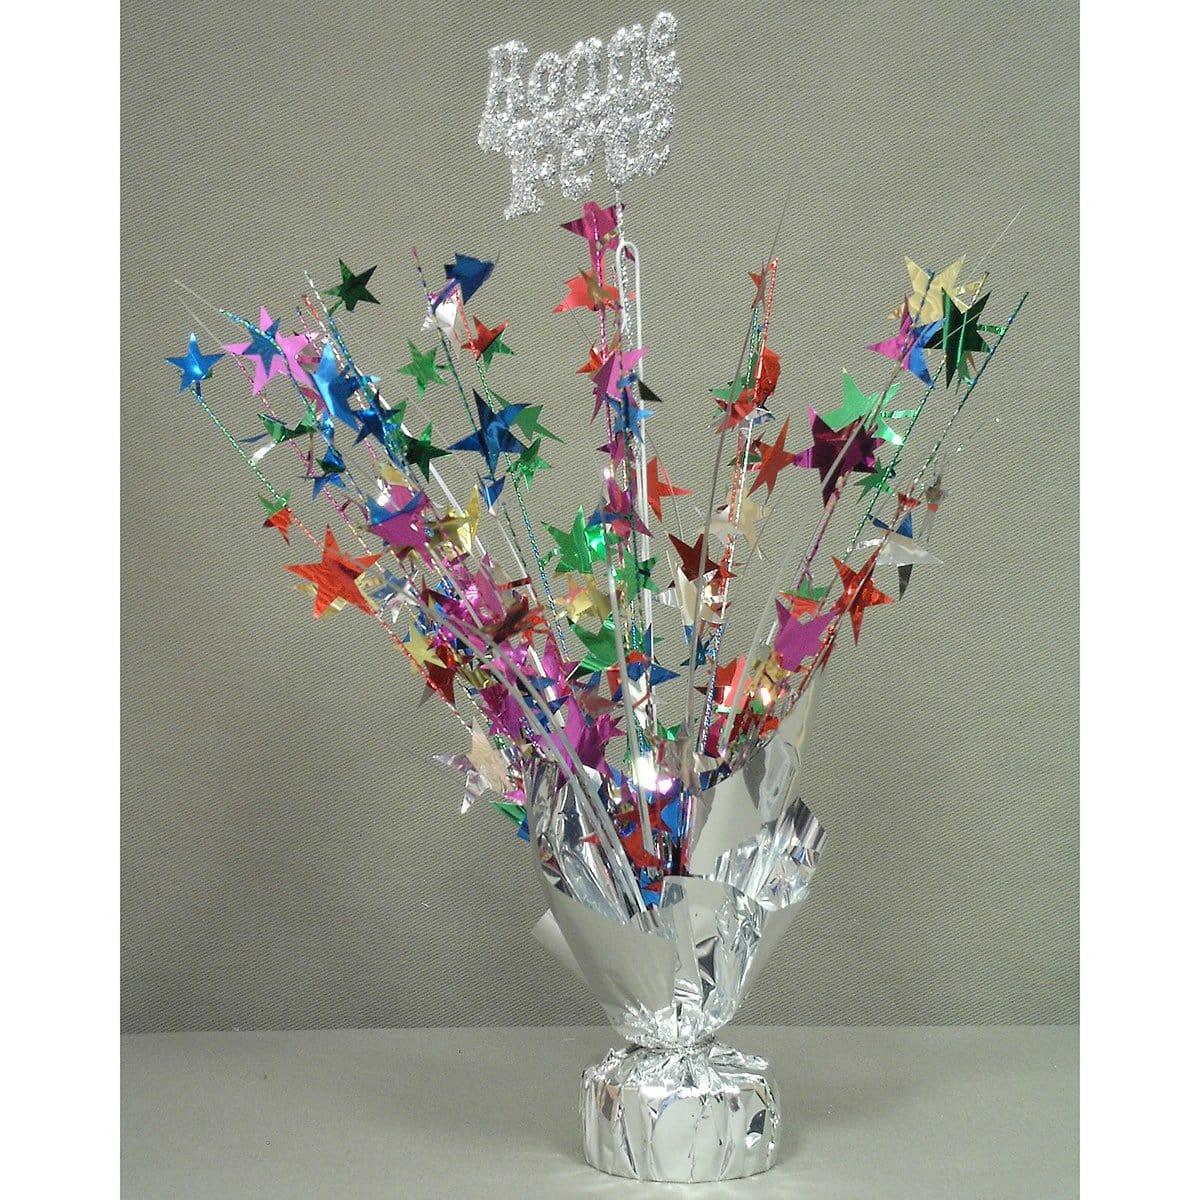 Buy Balloons Multicolor Bonne Fête Balloon Weight / Centerpiece sold at Party Expert